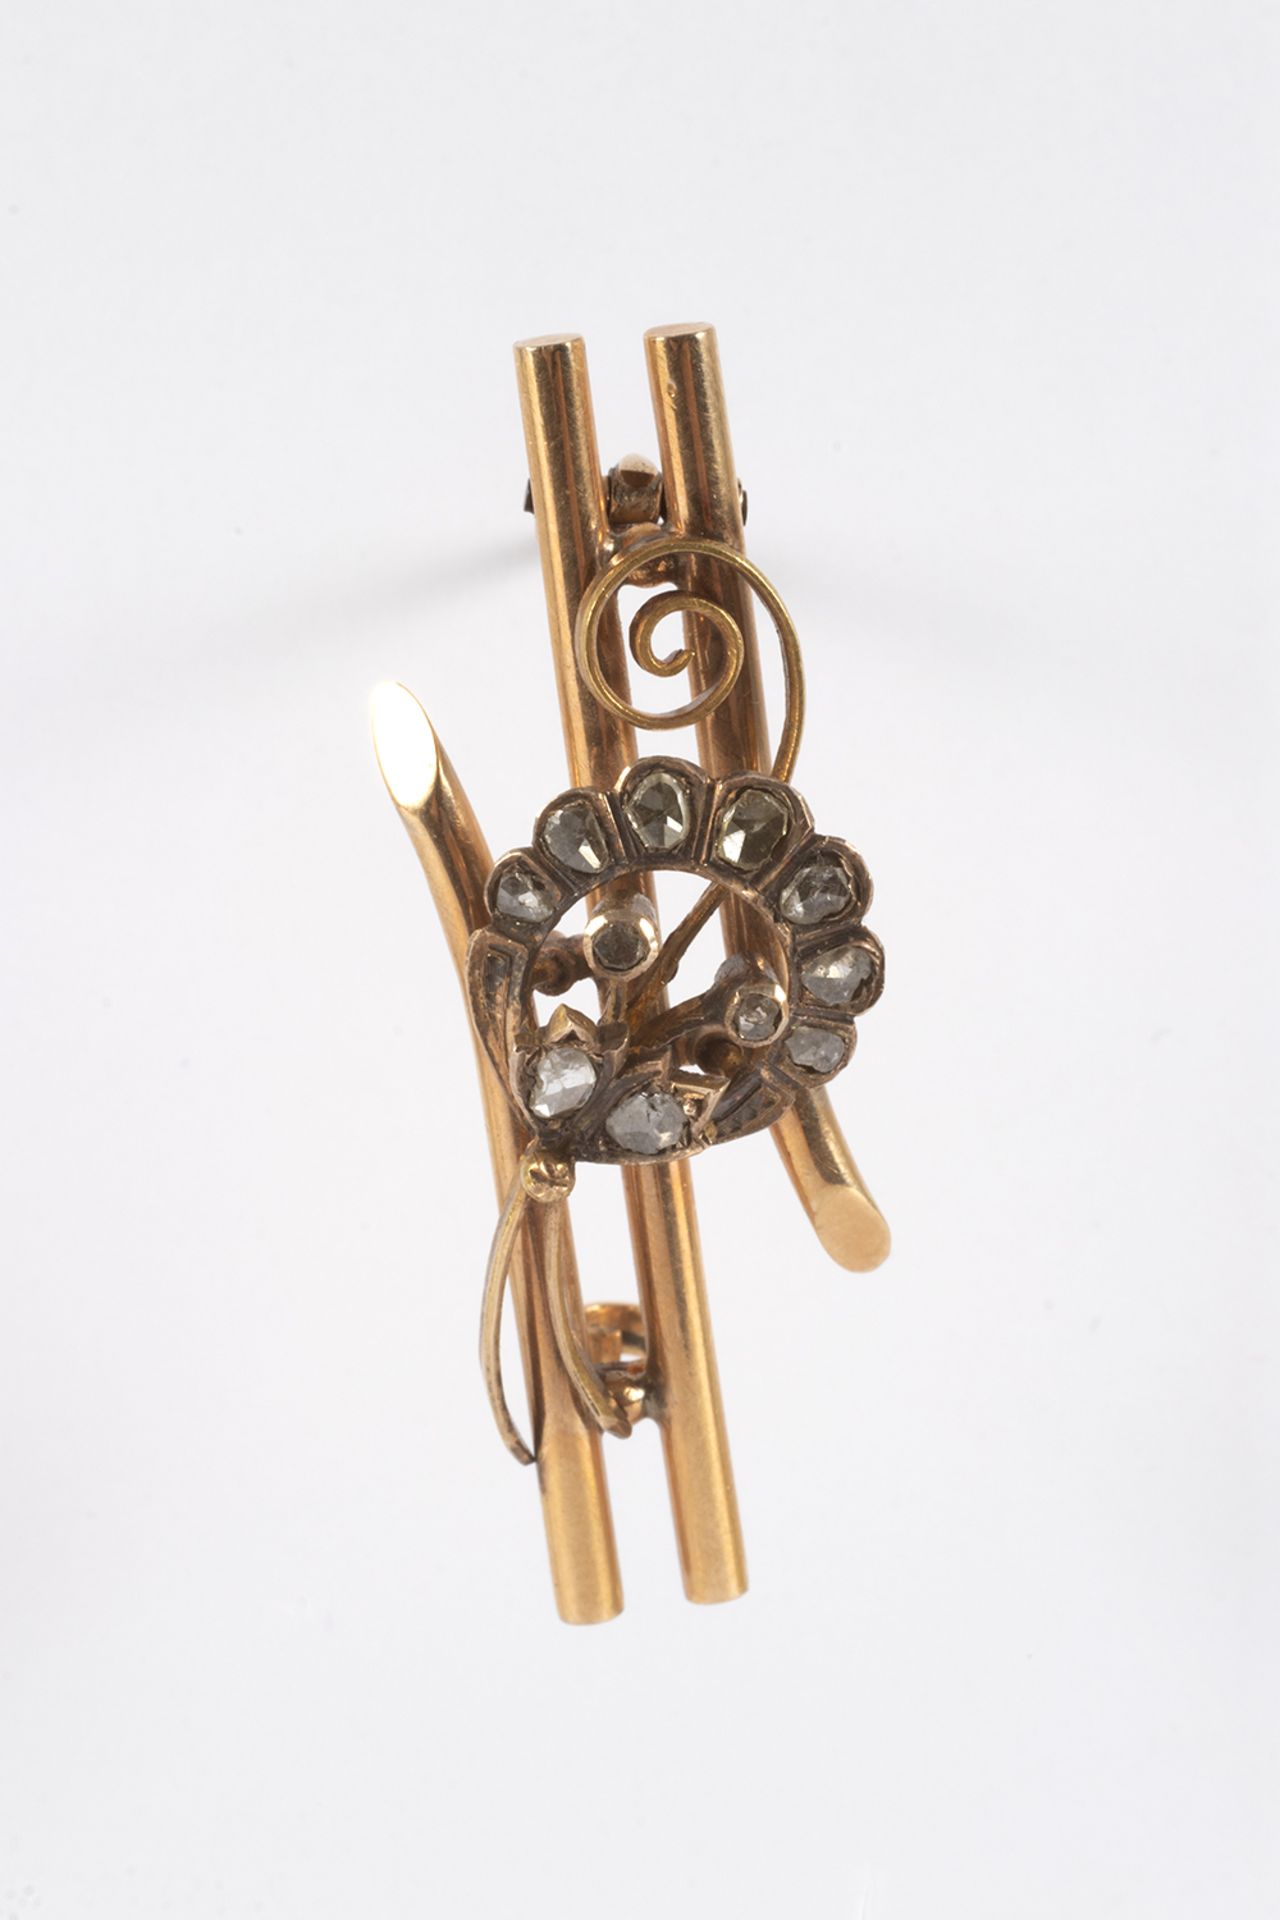 Elizabethan brooch in gold and rose cut diamonds.